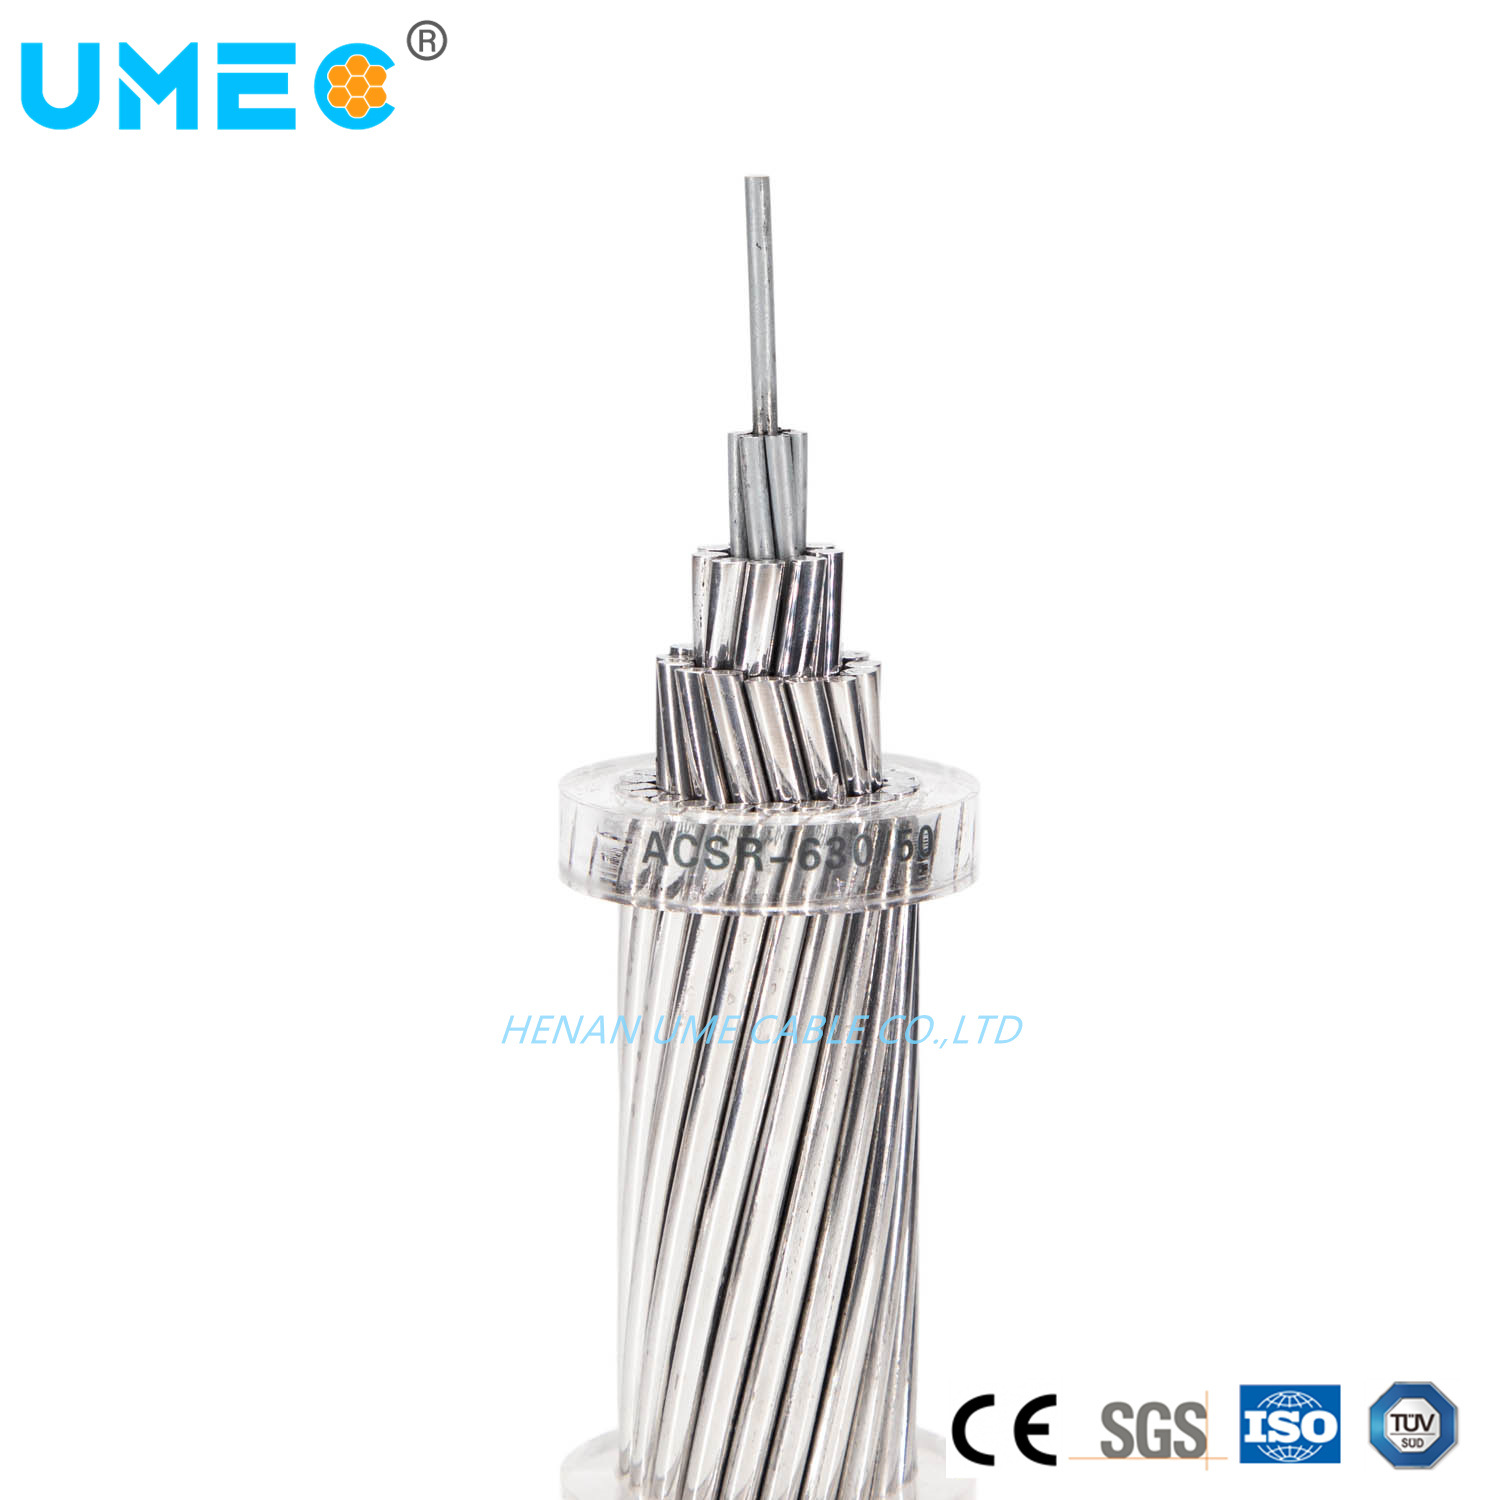 IEC Standard Overhead Cable ACSR Conductor for Power Substation